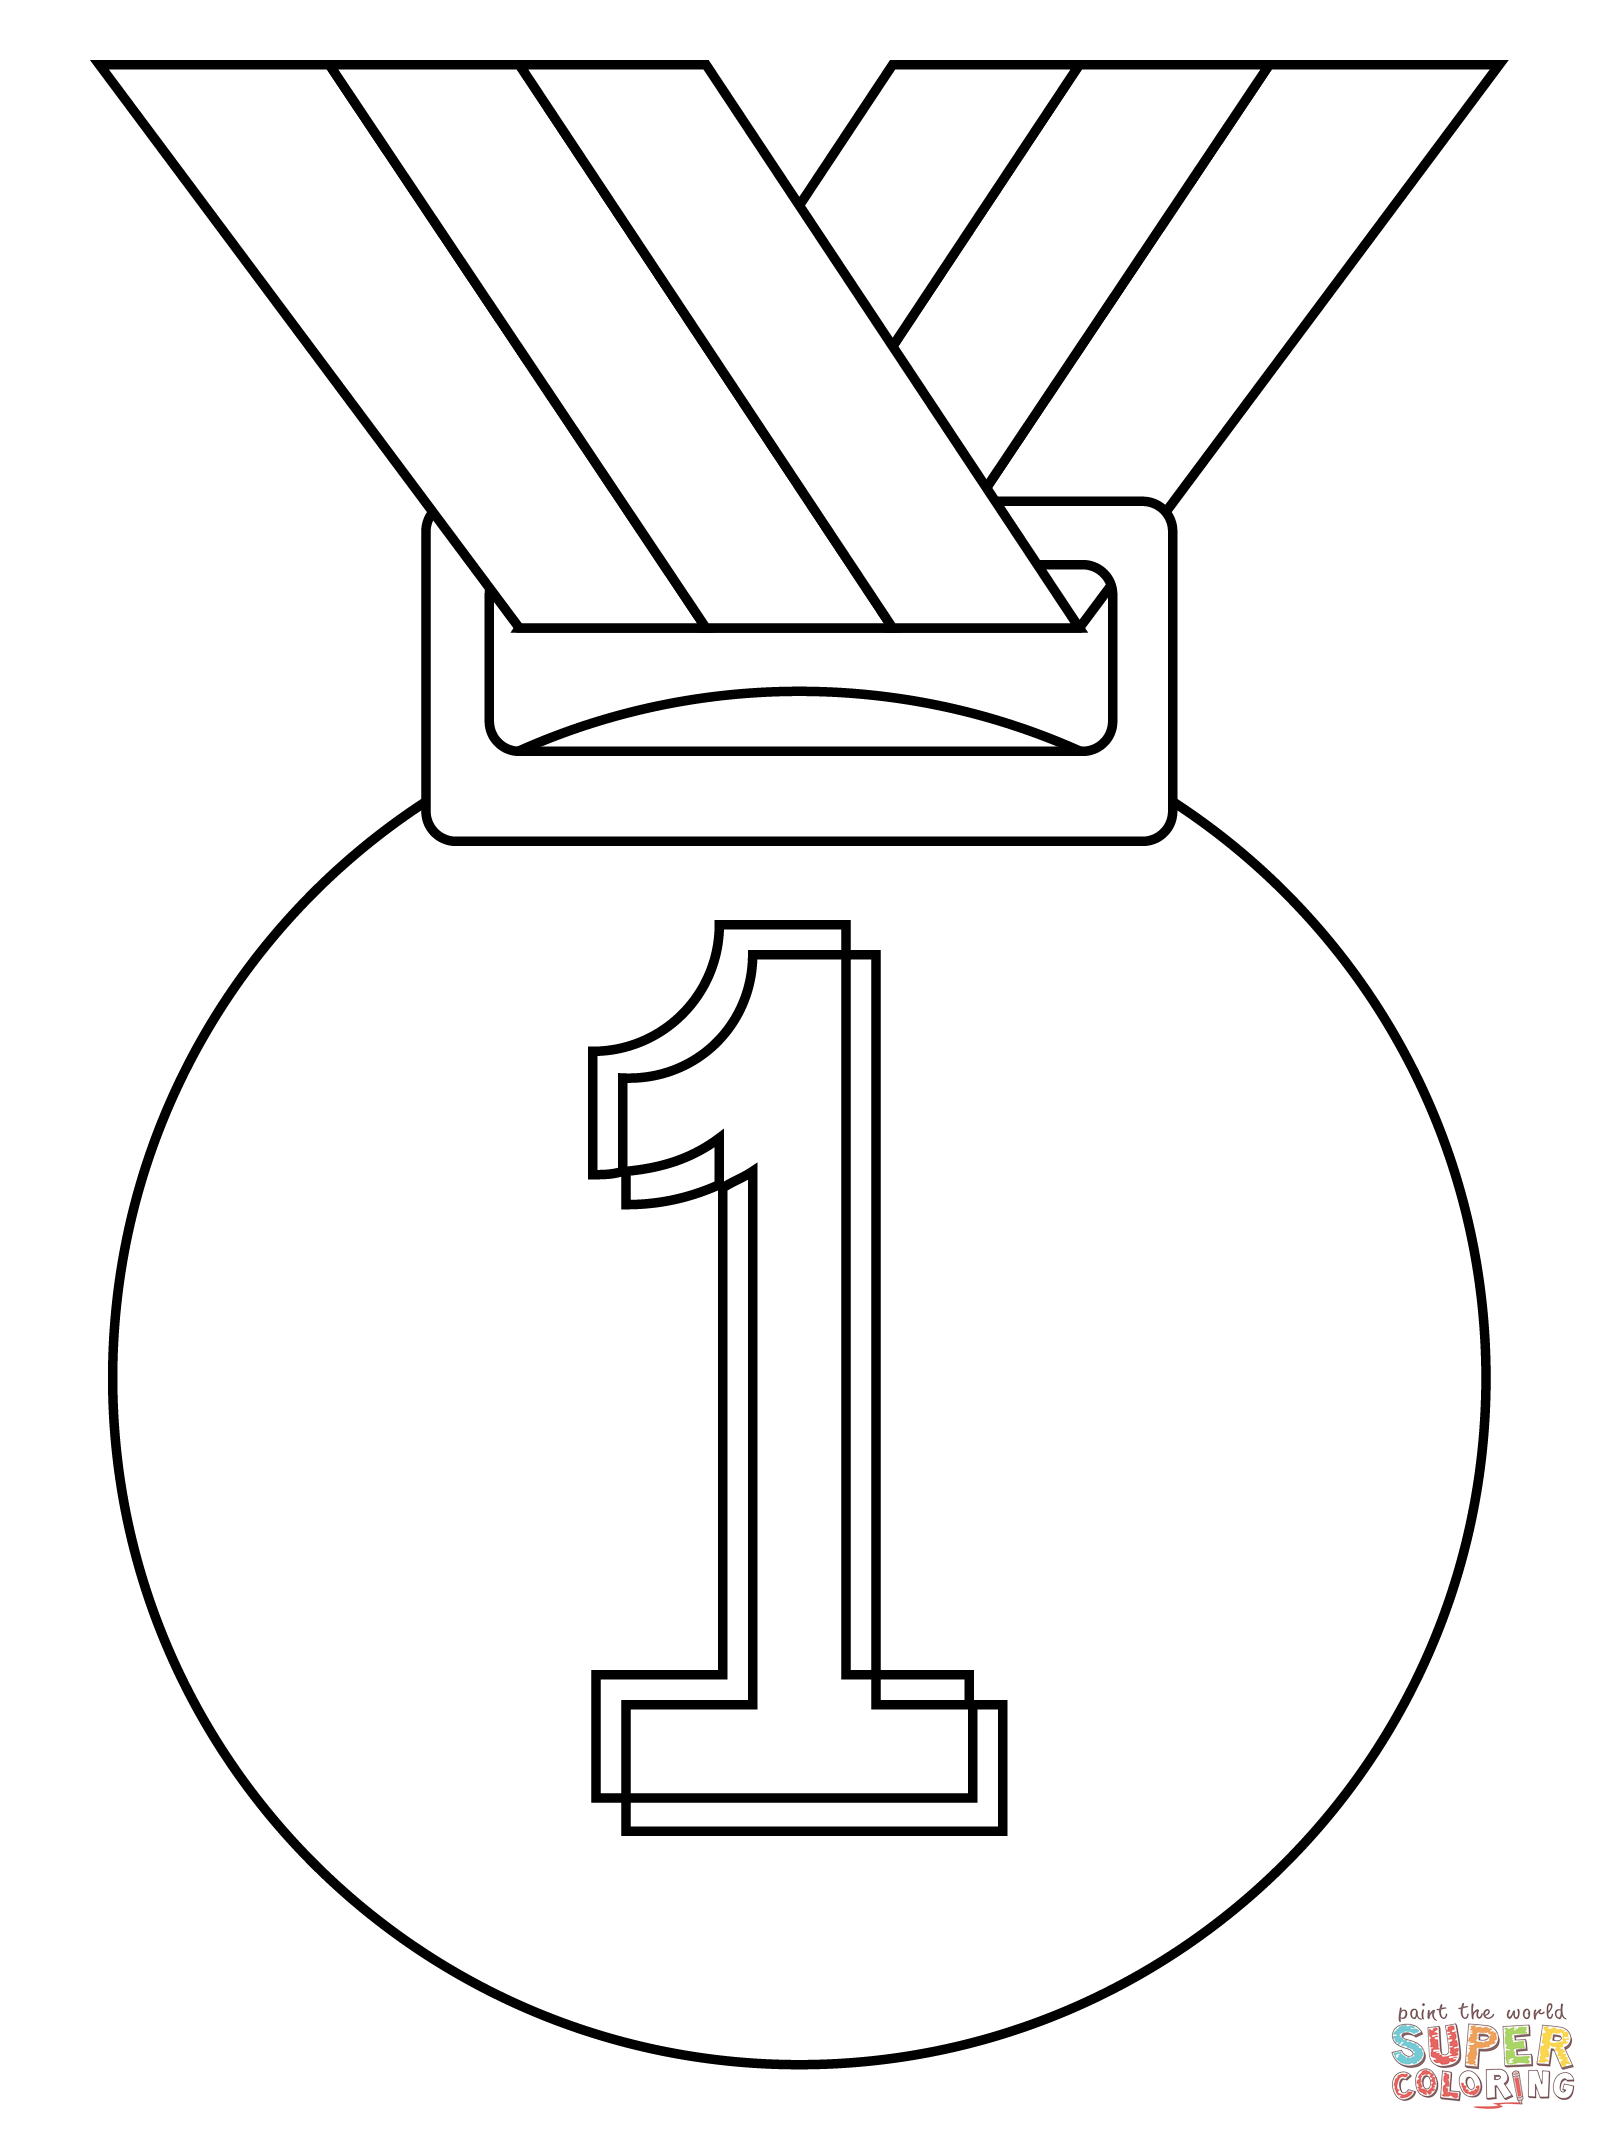 St place medal coloring page free printable coloring pages